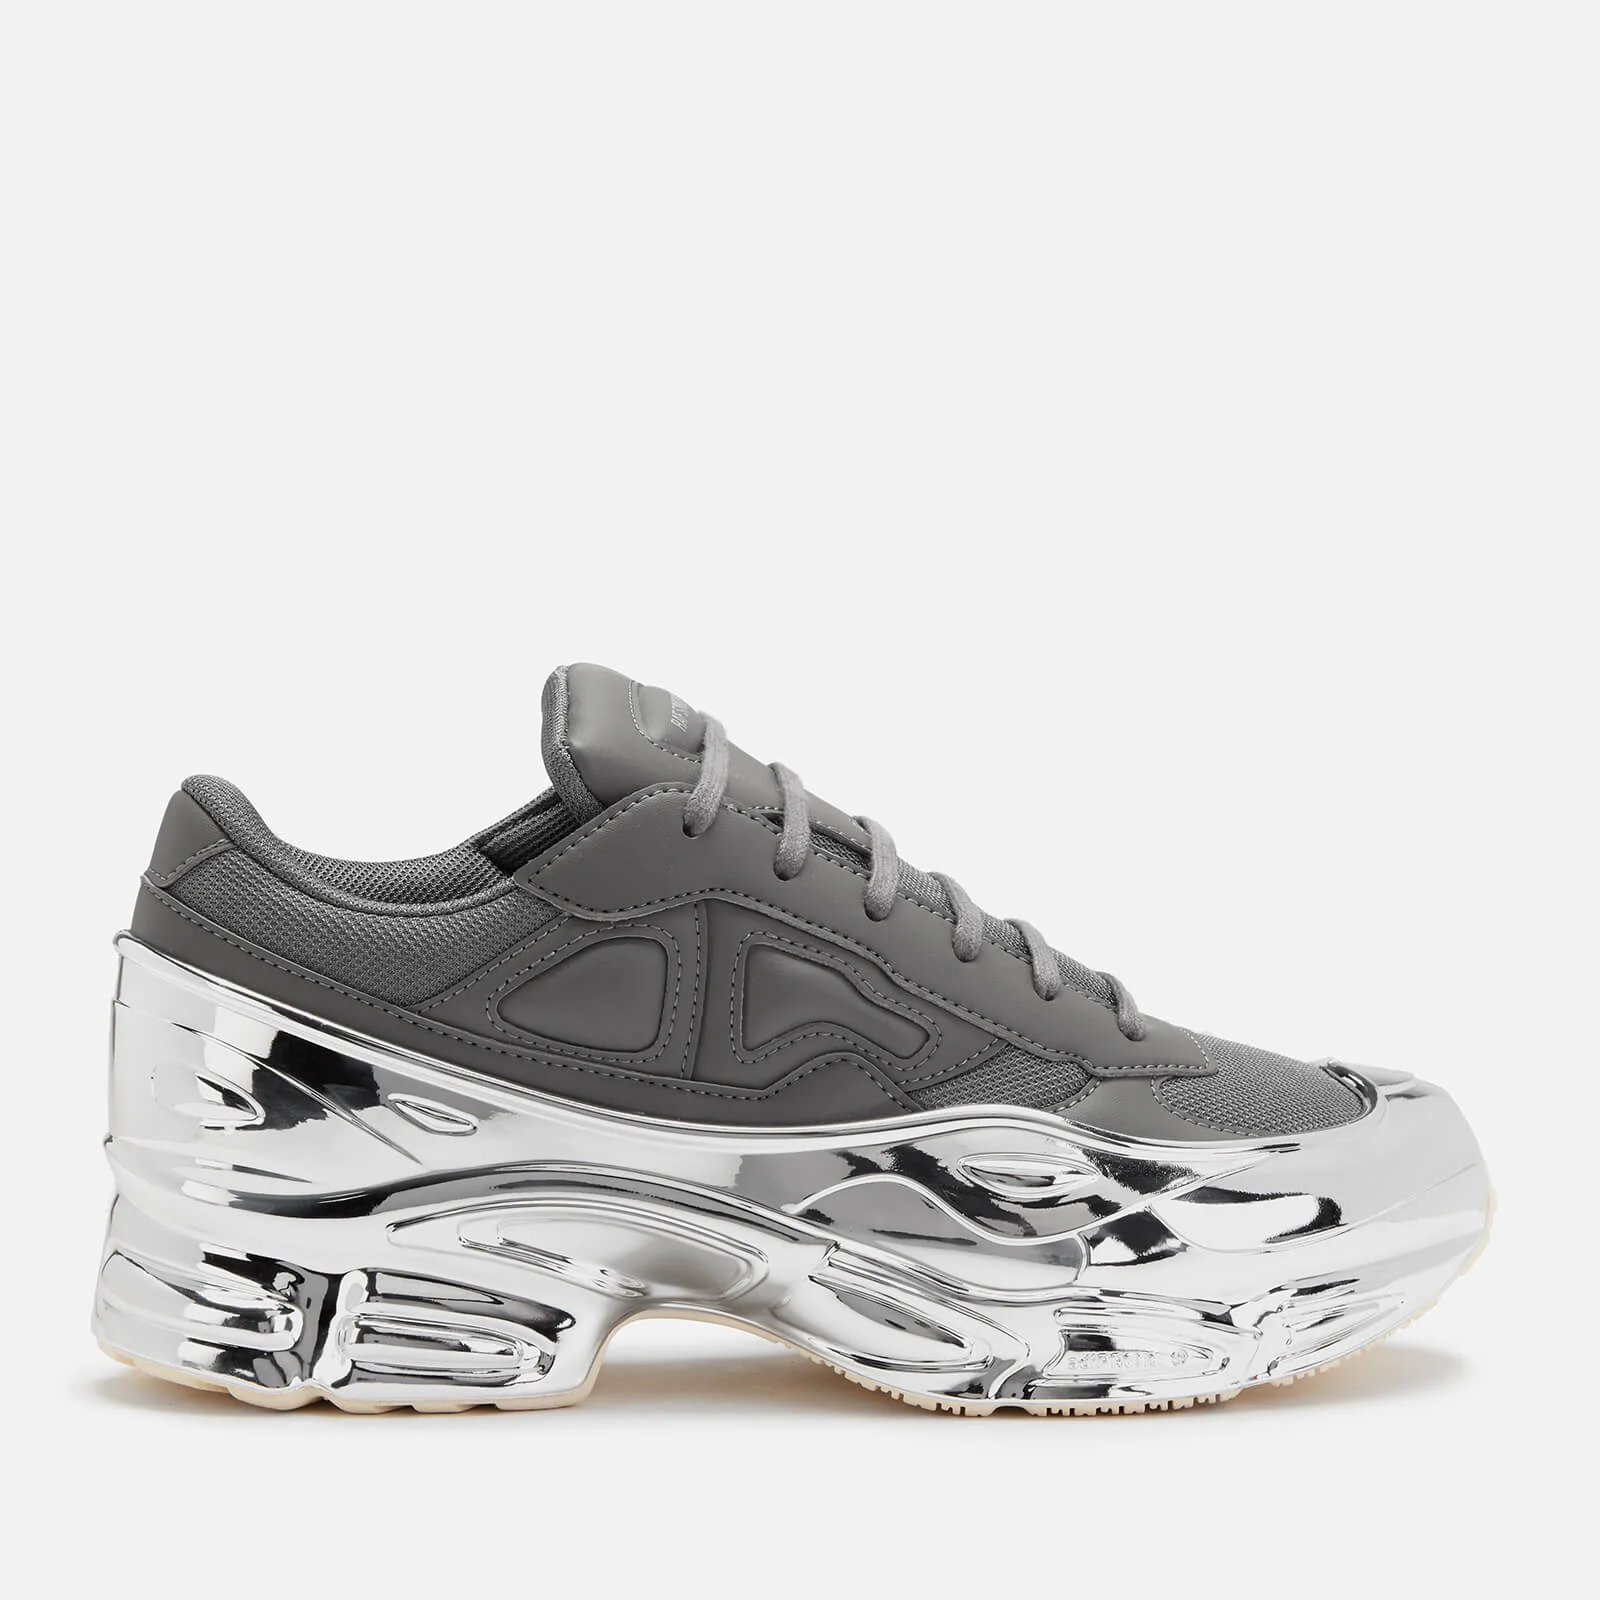 adidas by Raf Simons Men's Ozweego Trainers - Ash/Silver Image 1